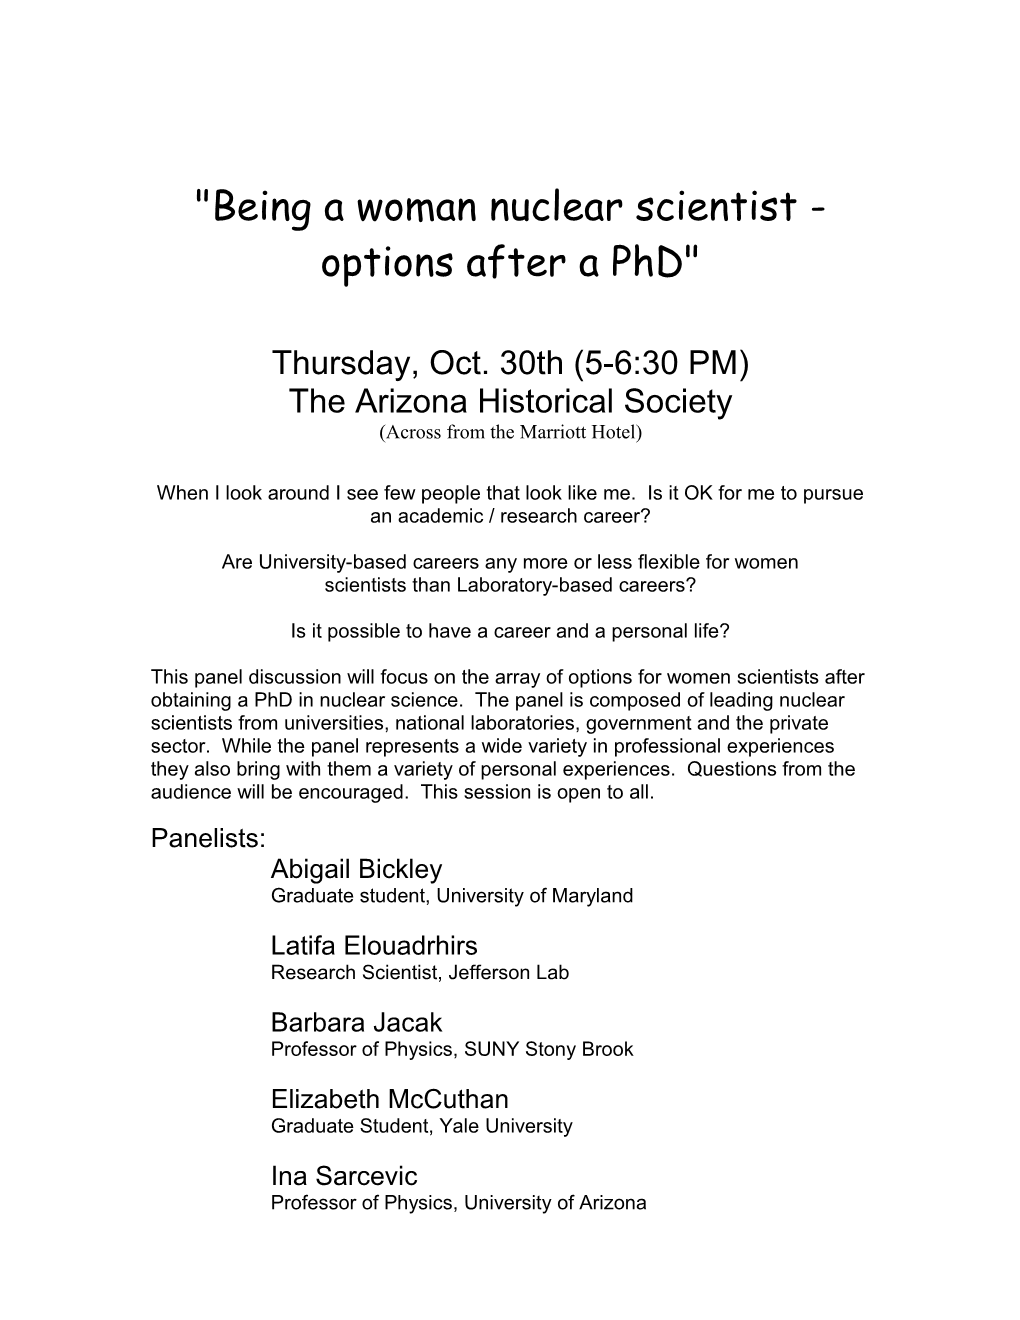 Being a Woman Nuclear Scientist - Options After a Phd